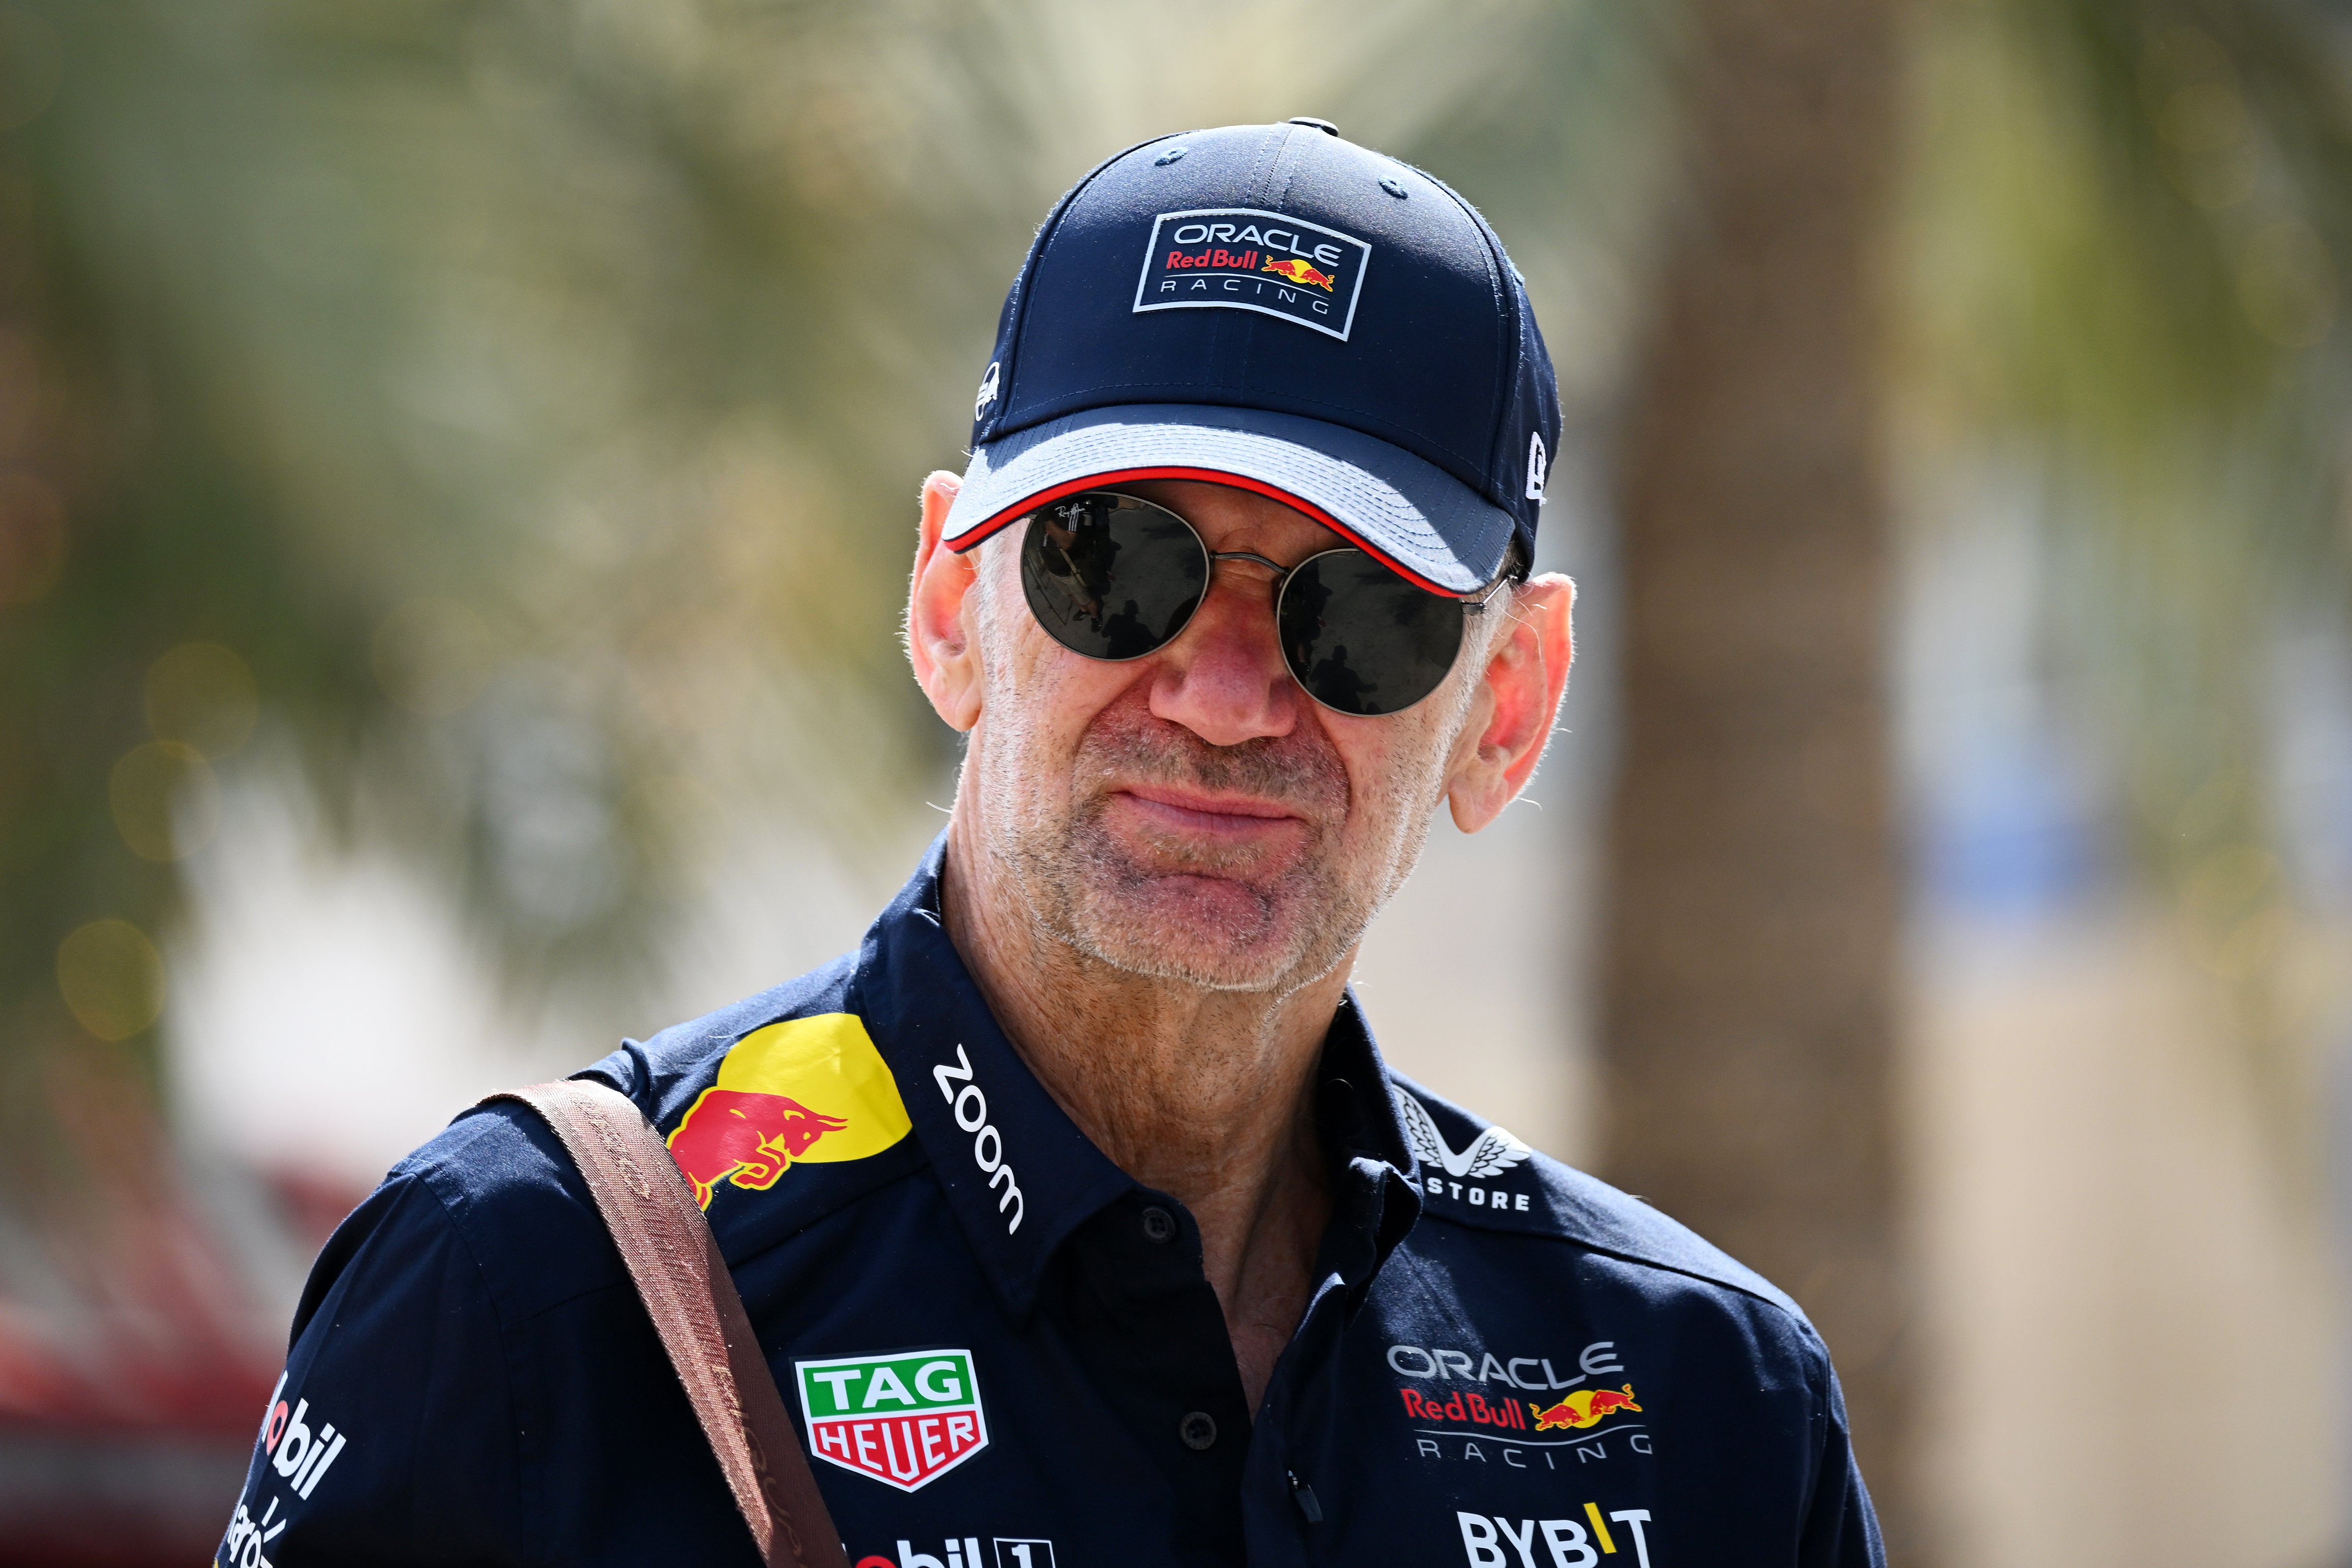 Design genius Adrian Newey will leave Red Bull after 18 years with the F1 team